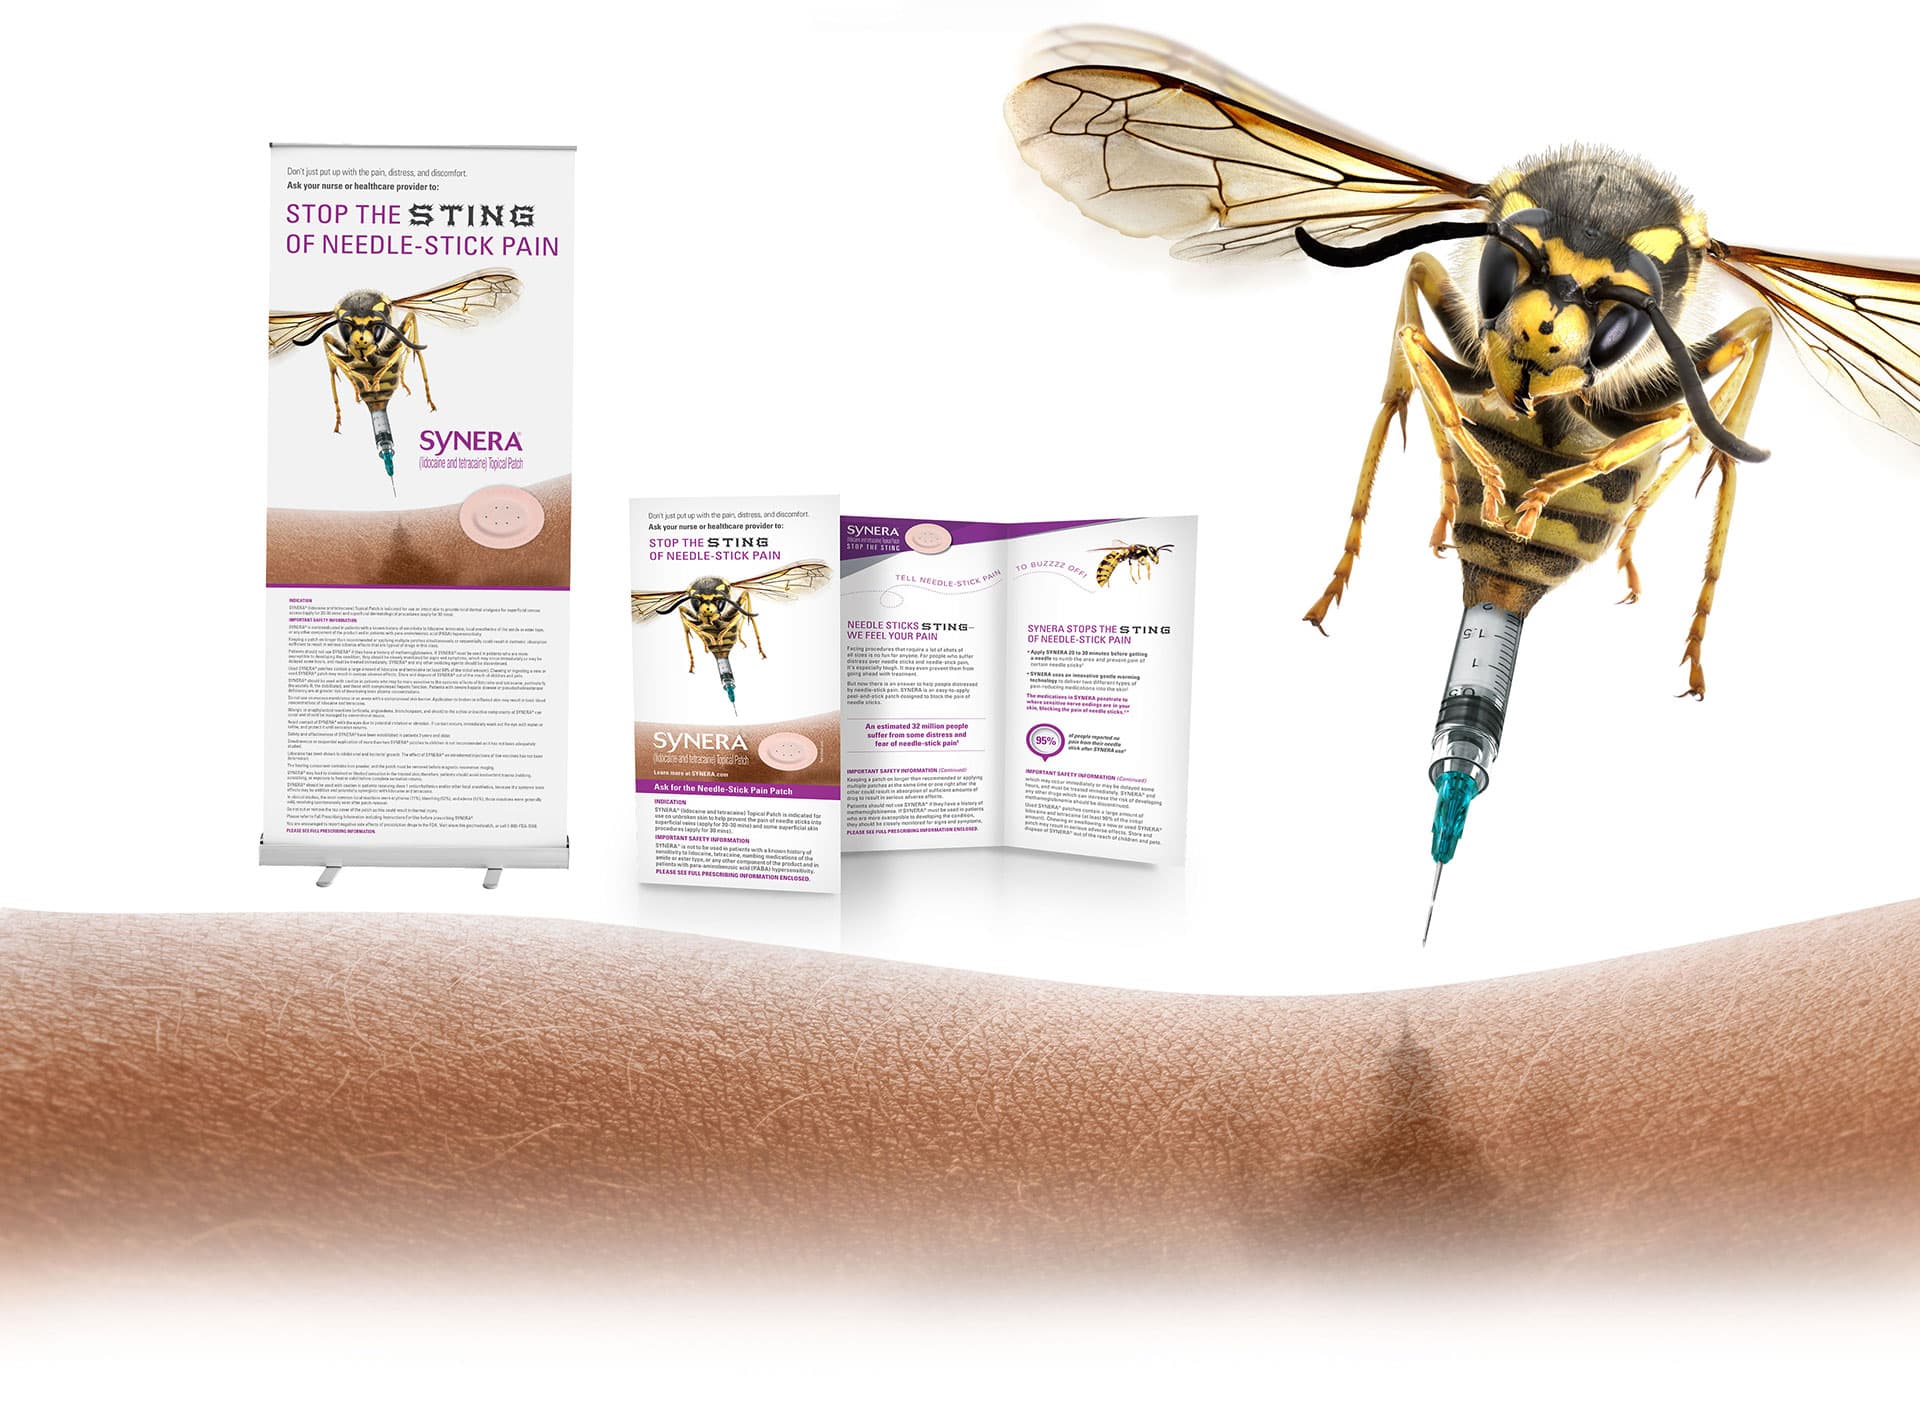 Fear of Needle-Stick Pain Is Real Stop the Sting campaign also uses a wasp metaphor to evoke the feeling of needle-stick pain for patients—just a little less scary than the scorpion for the non-professional audience.